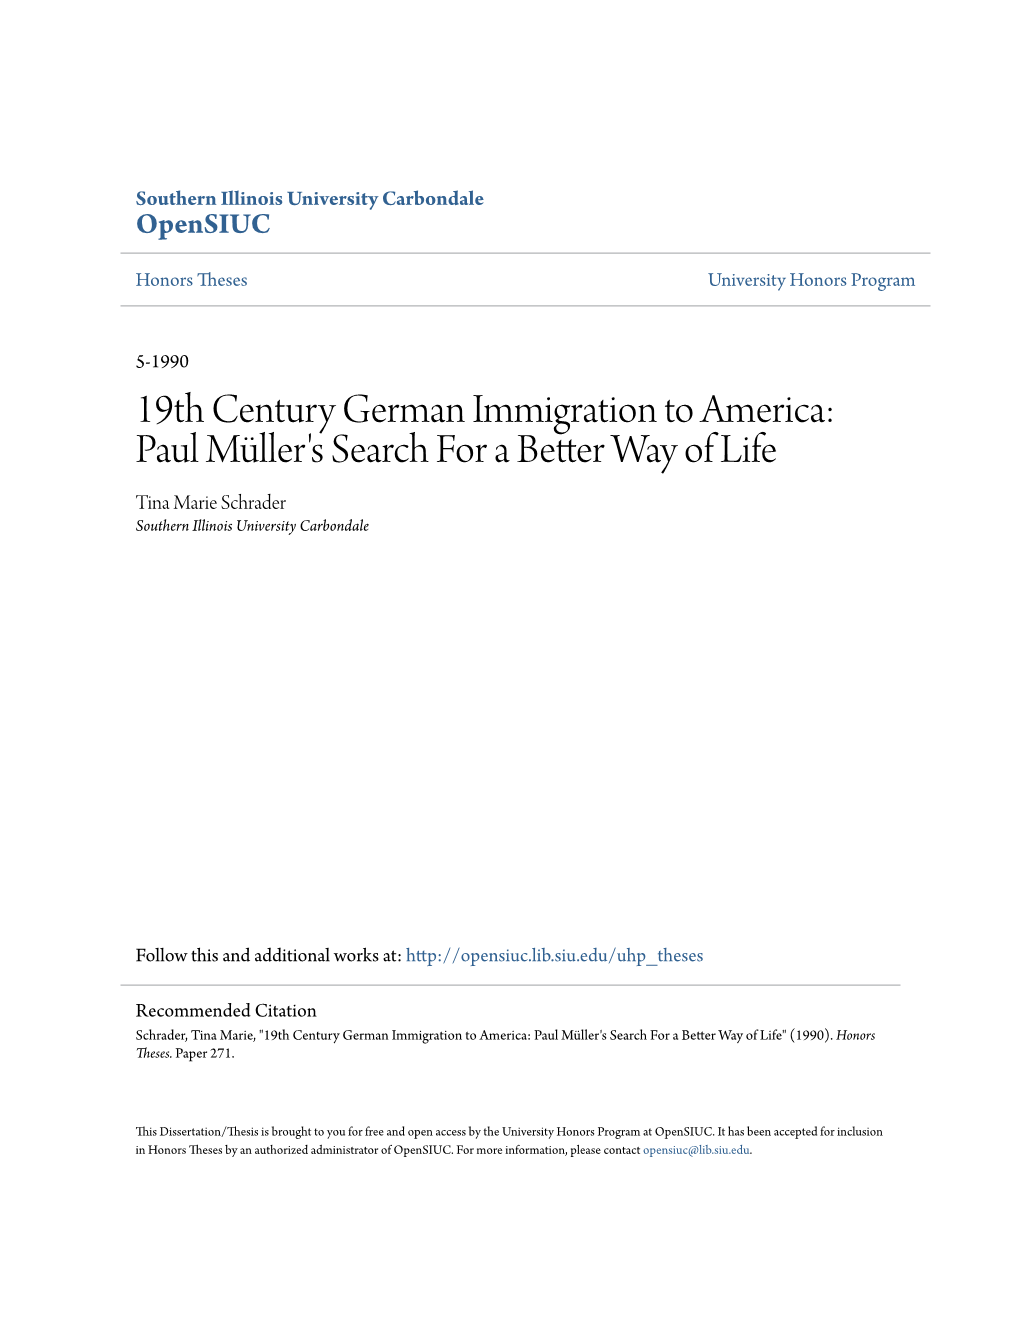 19Th Century German Immigration to America: Paul Müller's Search for a Better Way of Life Tina Marie Schrader Southern Illinois University Carbondale